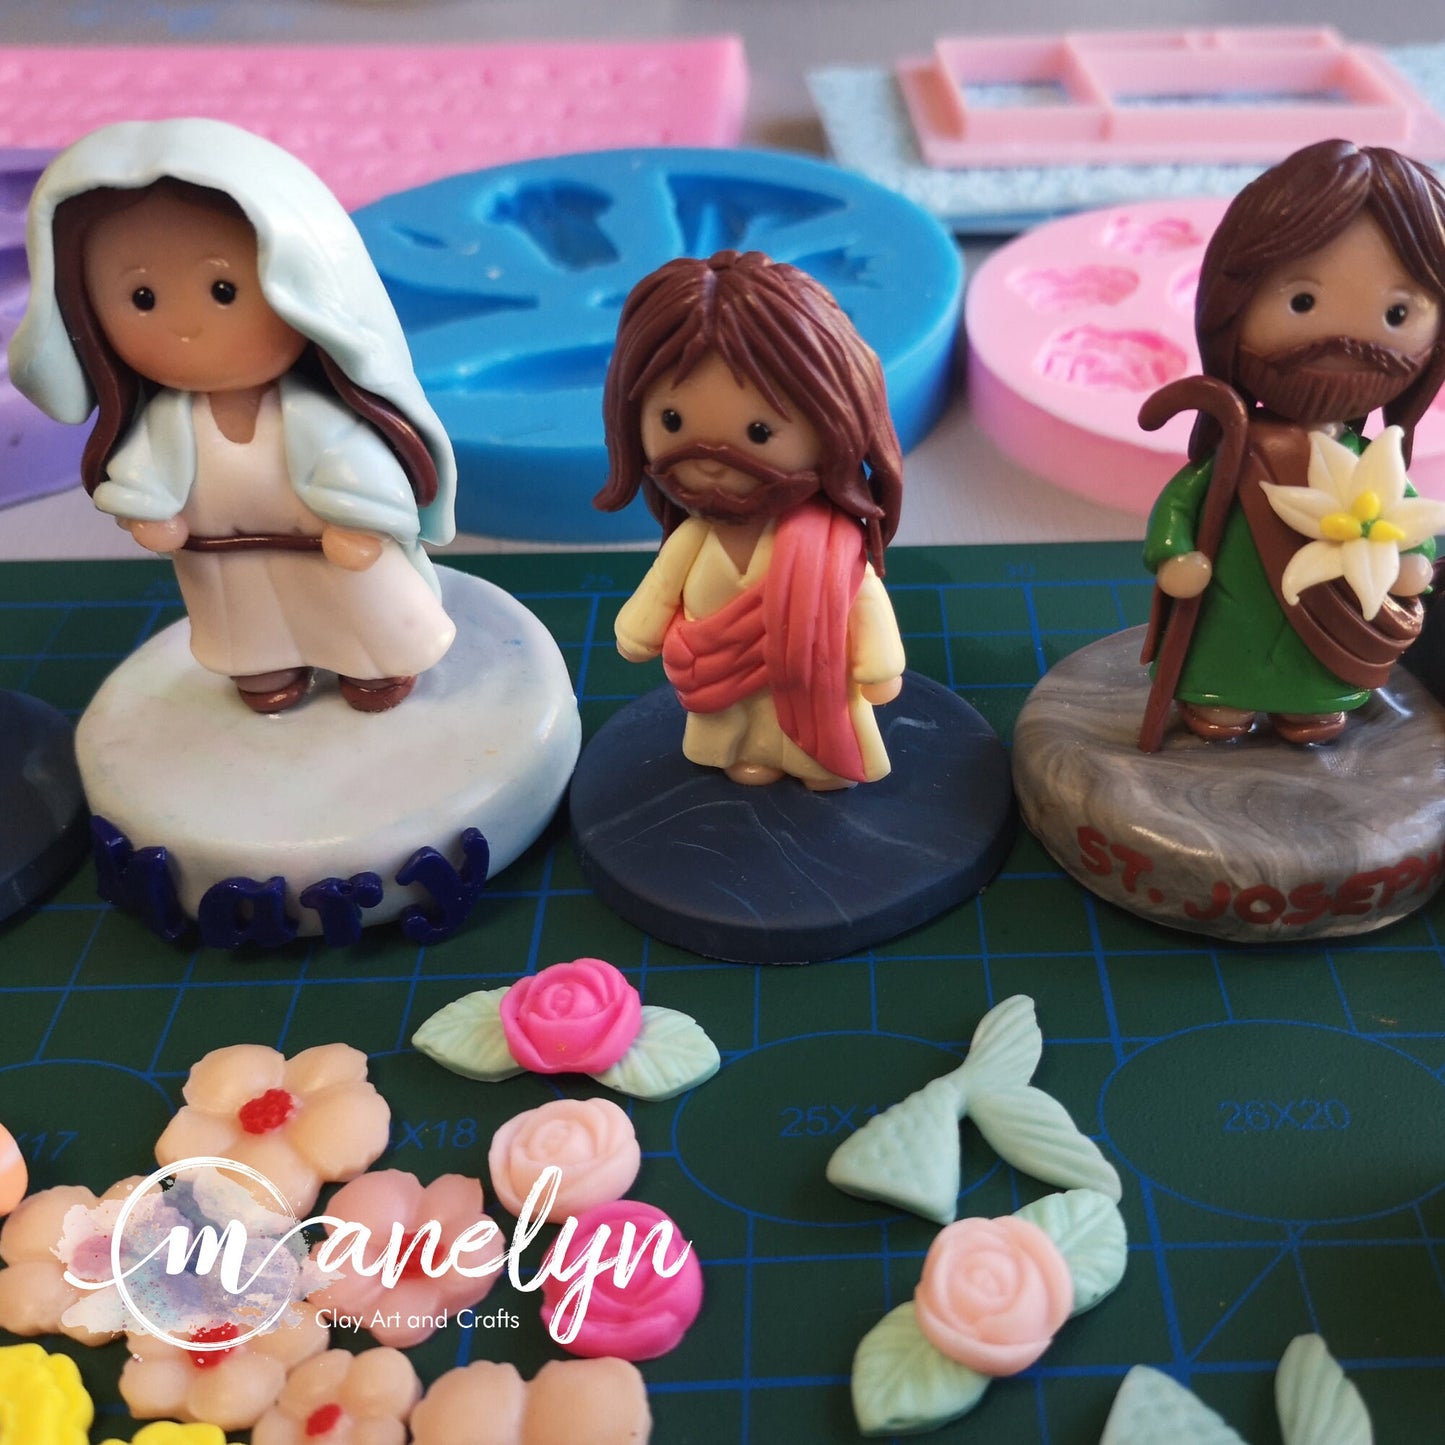 Air Dry Clay Personalized Chibi Dolls for Keychain, Cake Topper, Ref Magnet for Birthdays, Wedding Anniversary Souvenirs